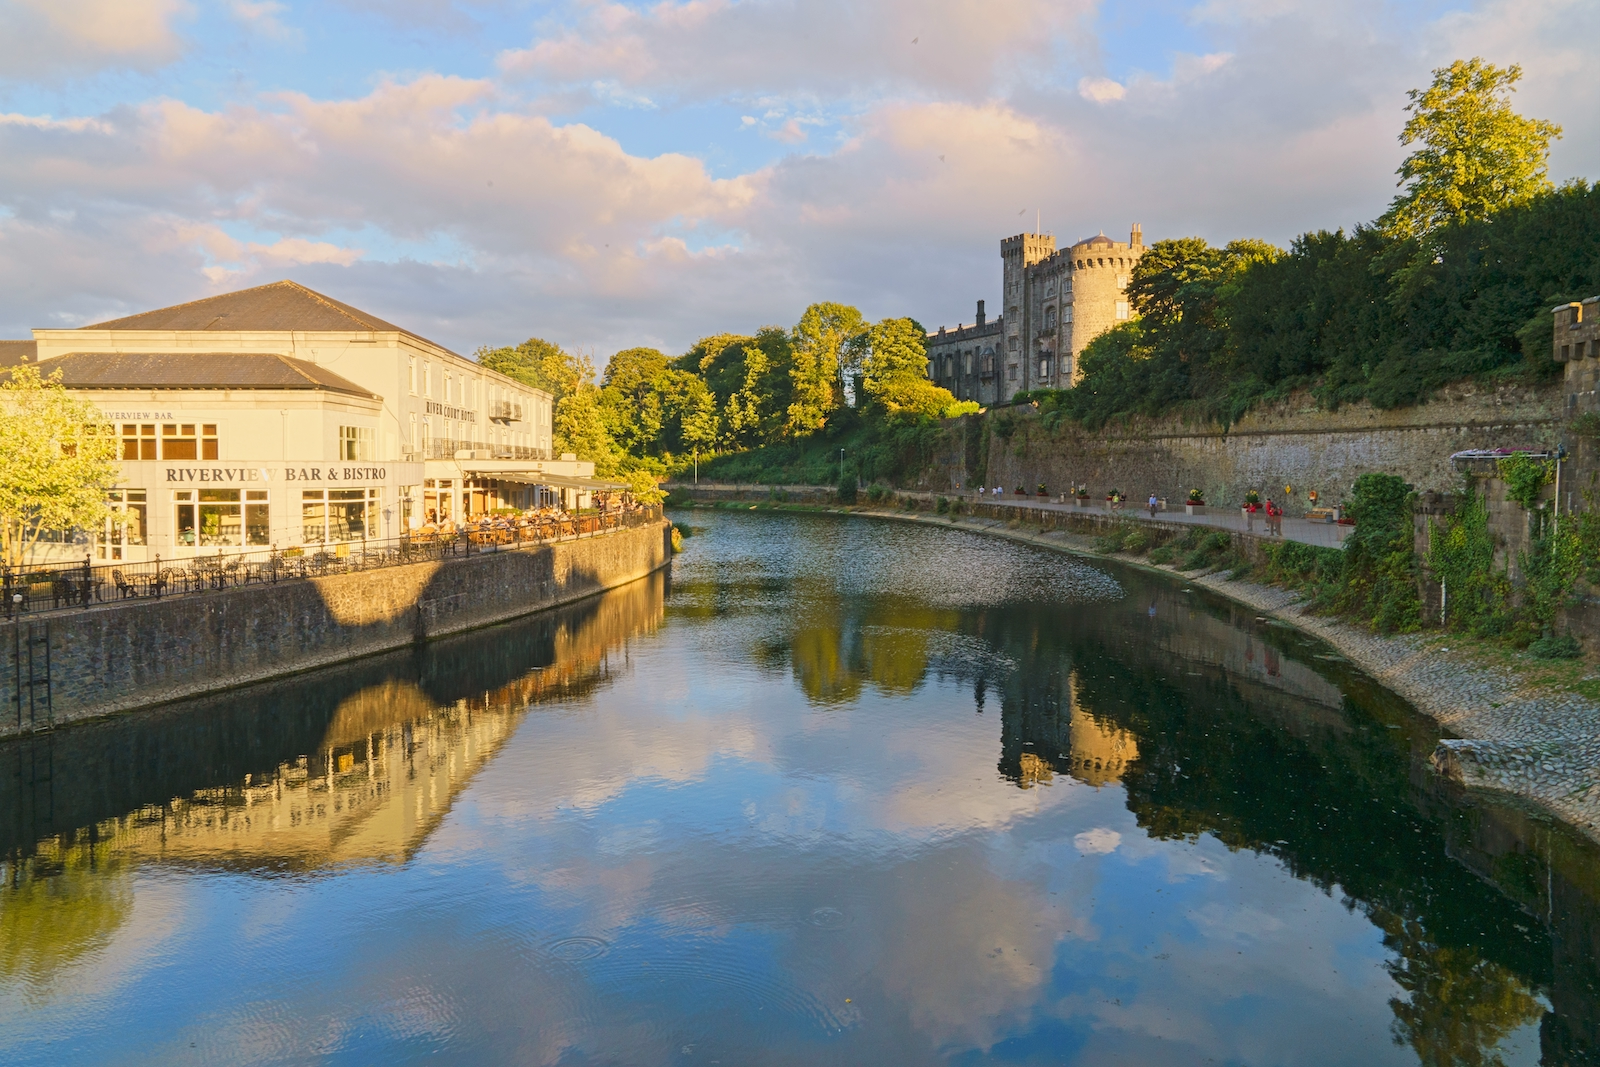 kilkenny-castle-on-the-banks-of-the-river-nore-[late-evening-in-august-2018]-227083-excellent